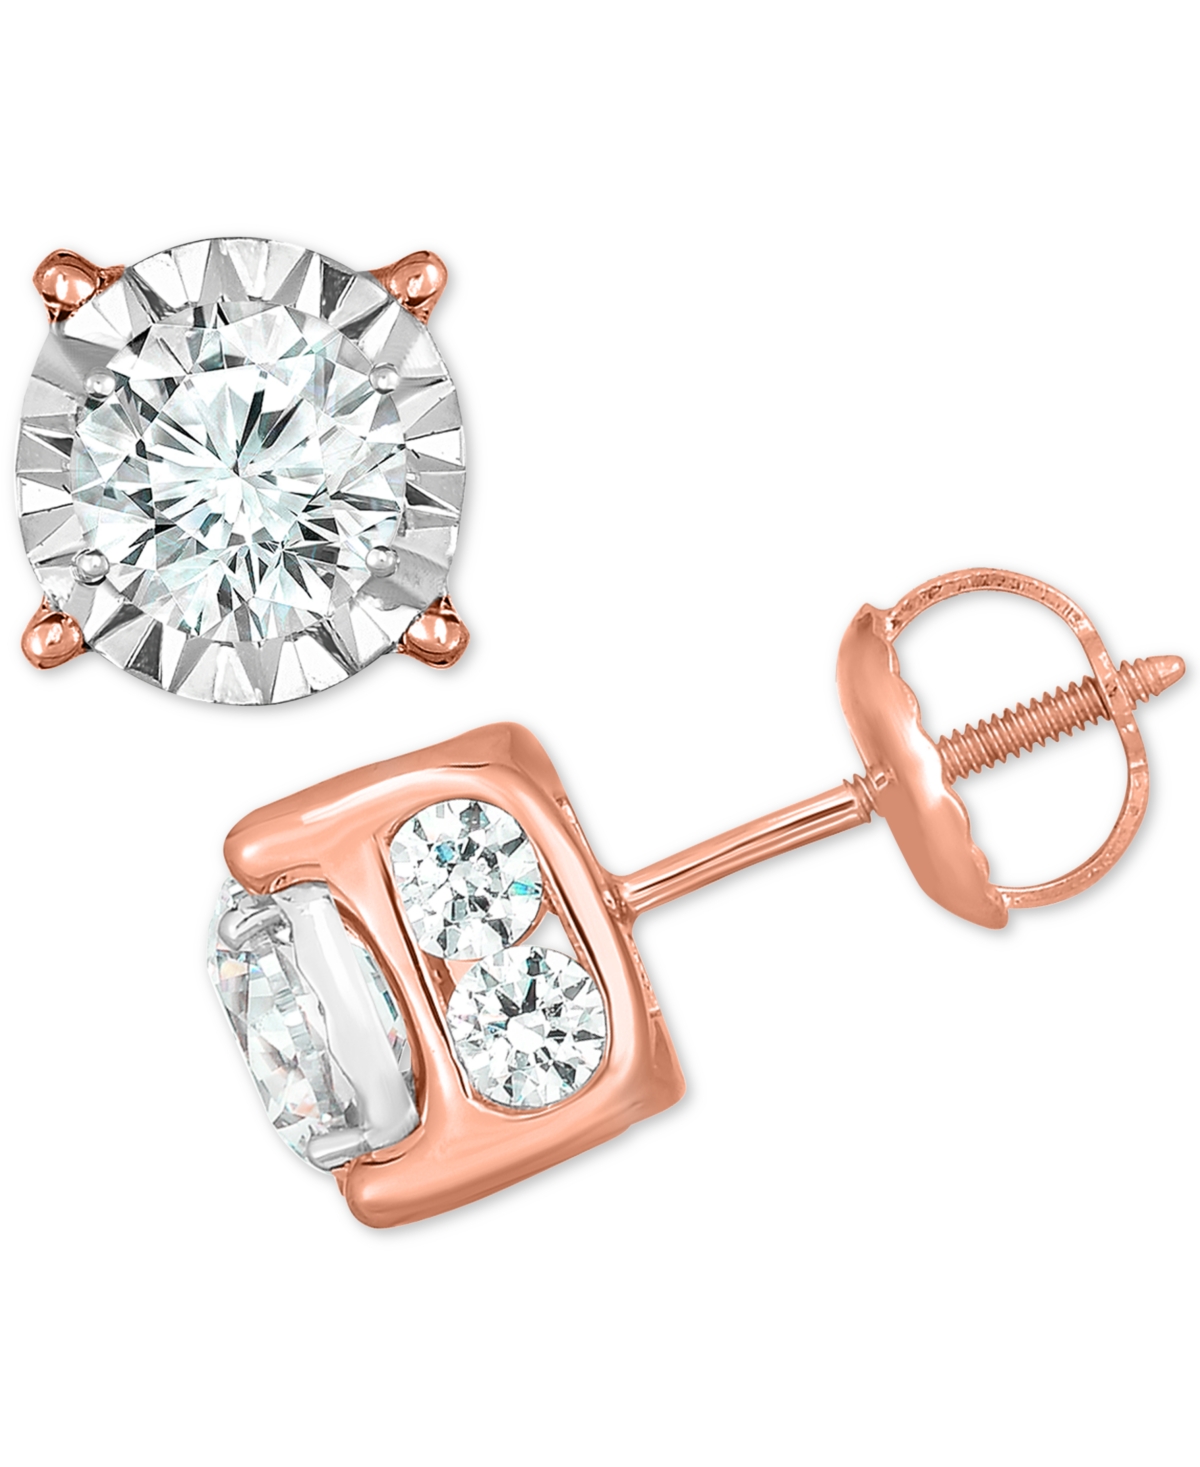 Diamond Stud Earrings (2 ct. t.w.) in 14k White, Yellow or Rose Gold - Rose Gold